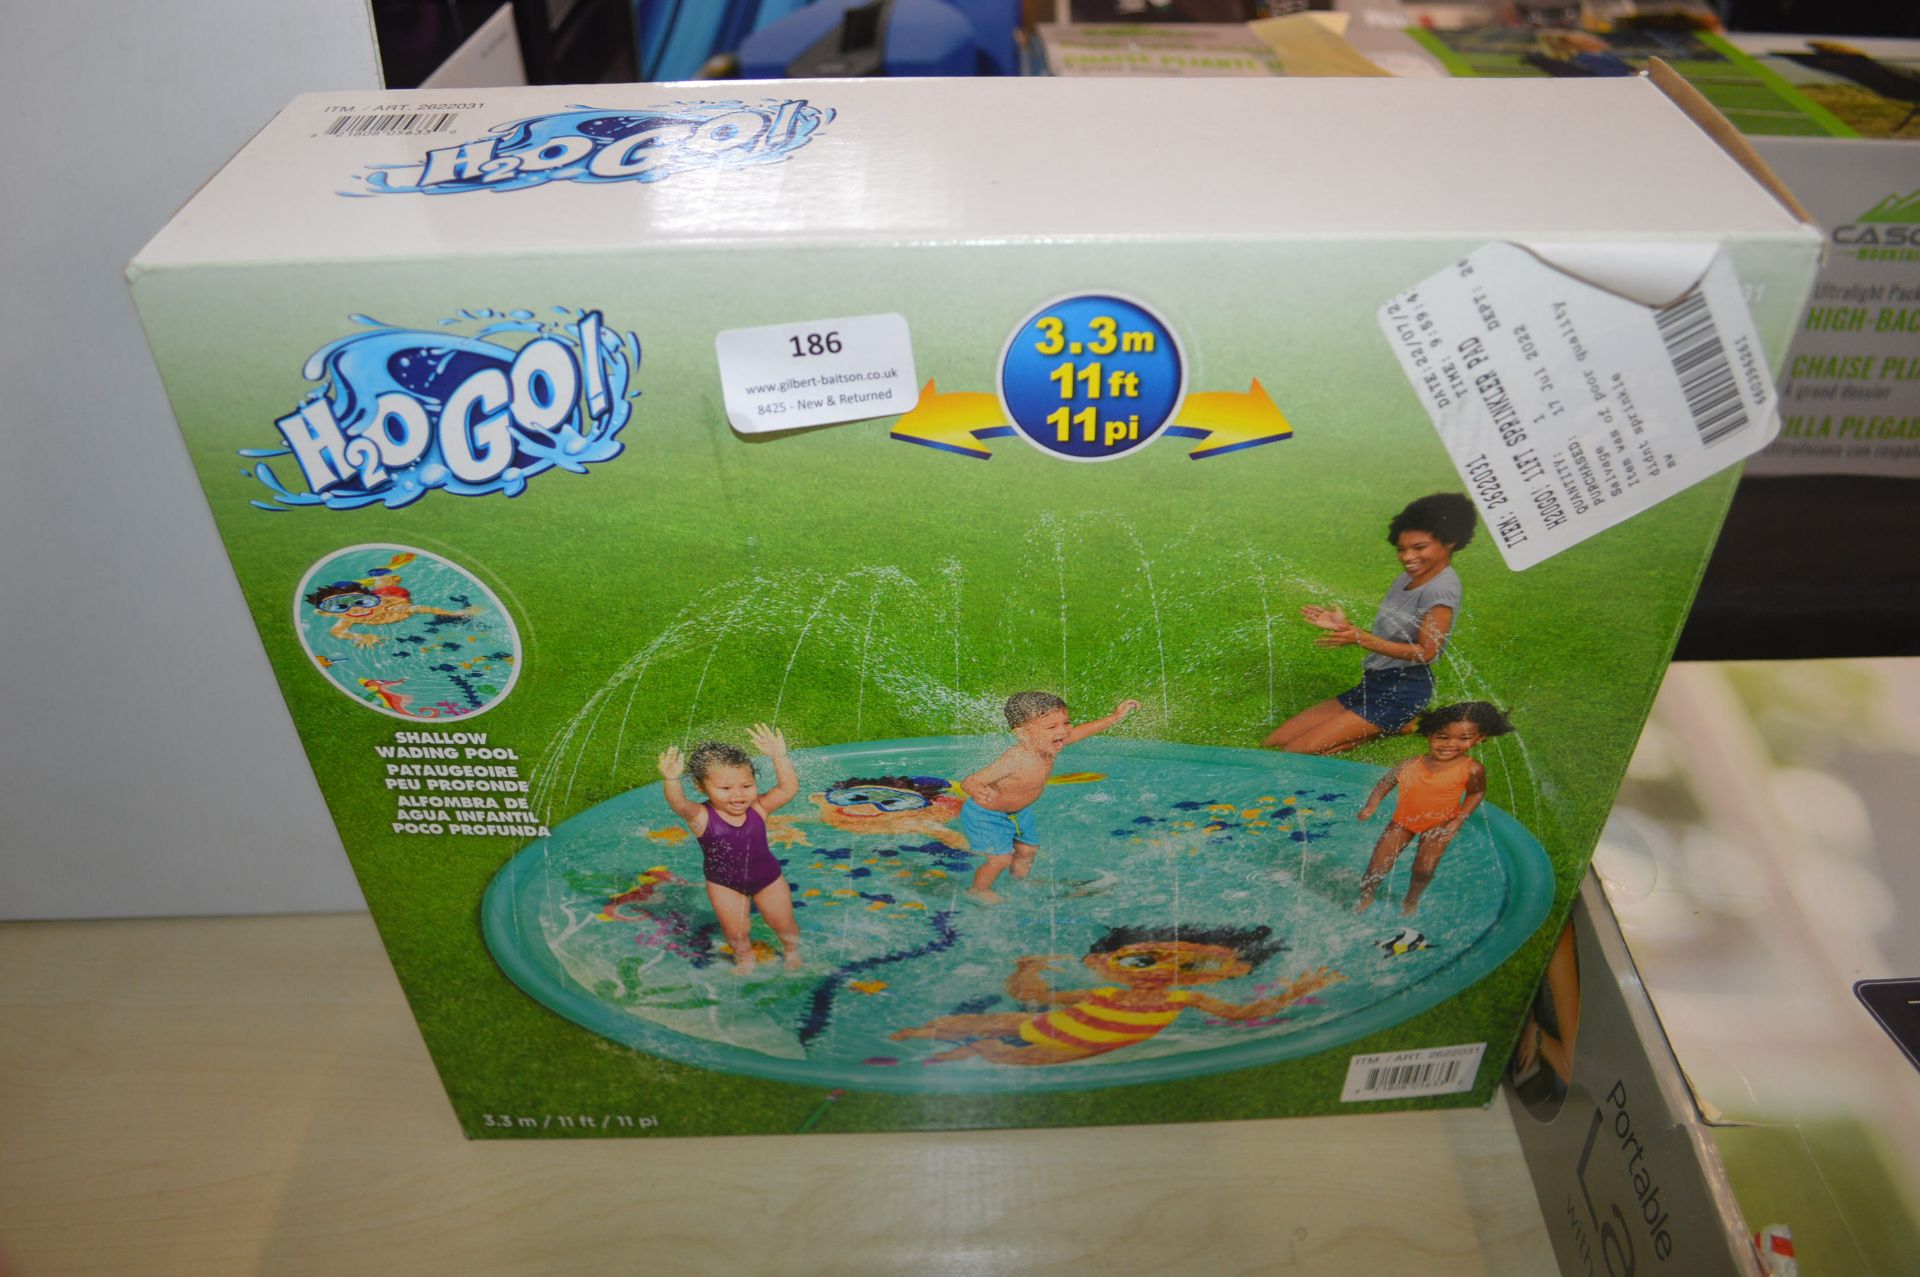 *H2O Go 3.3m Shallow Wading Pool with Sprinkler Pa